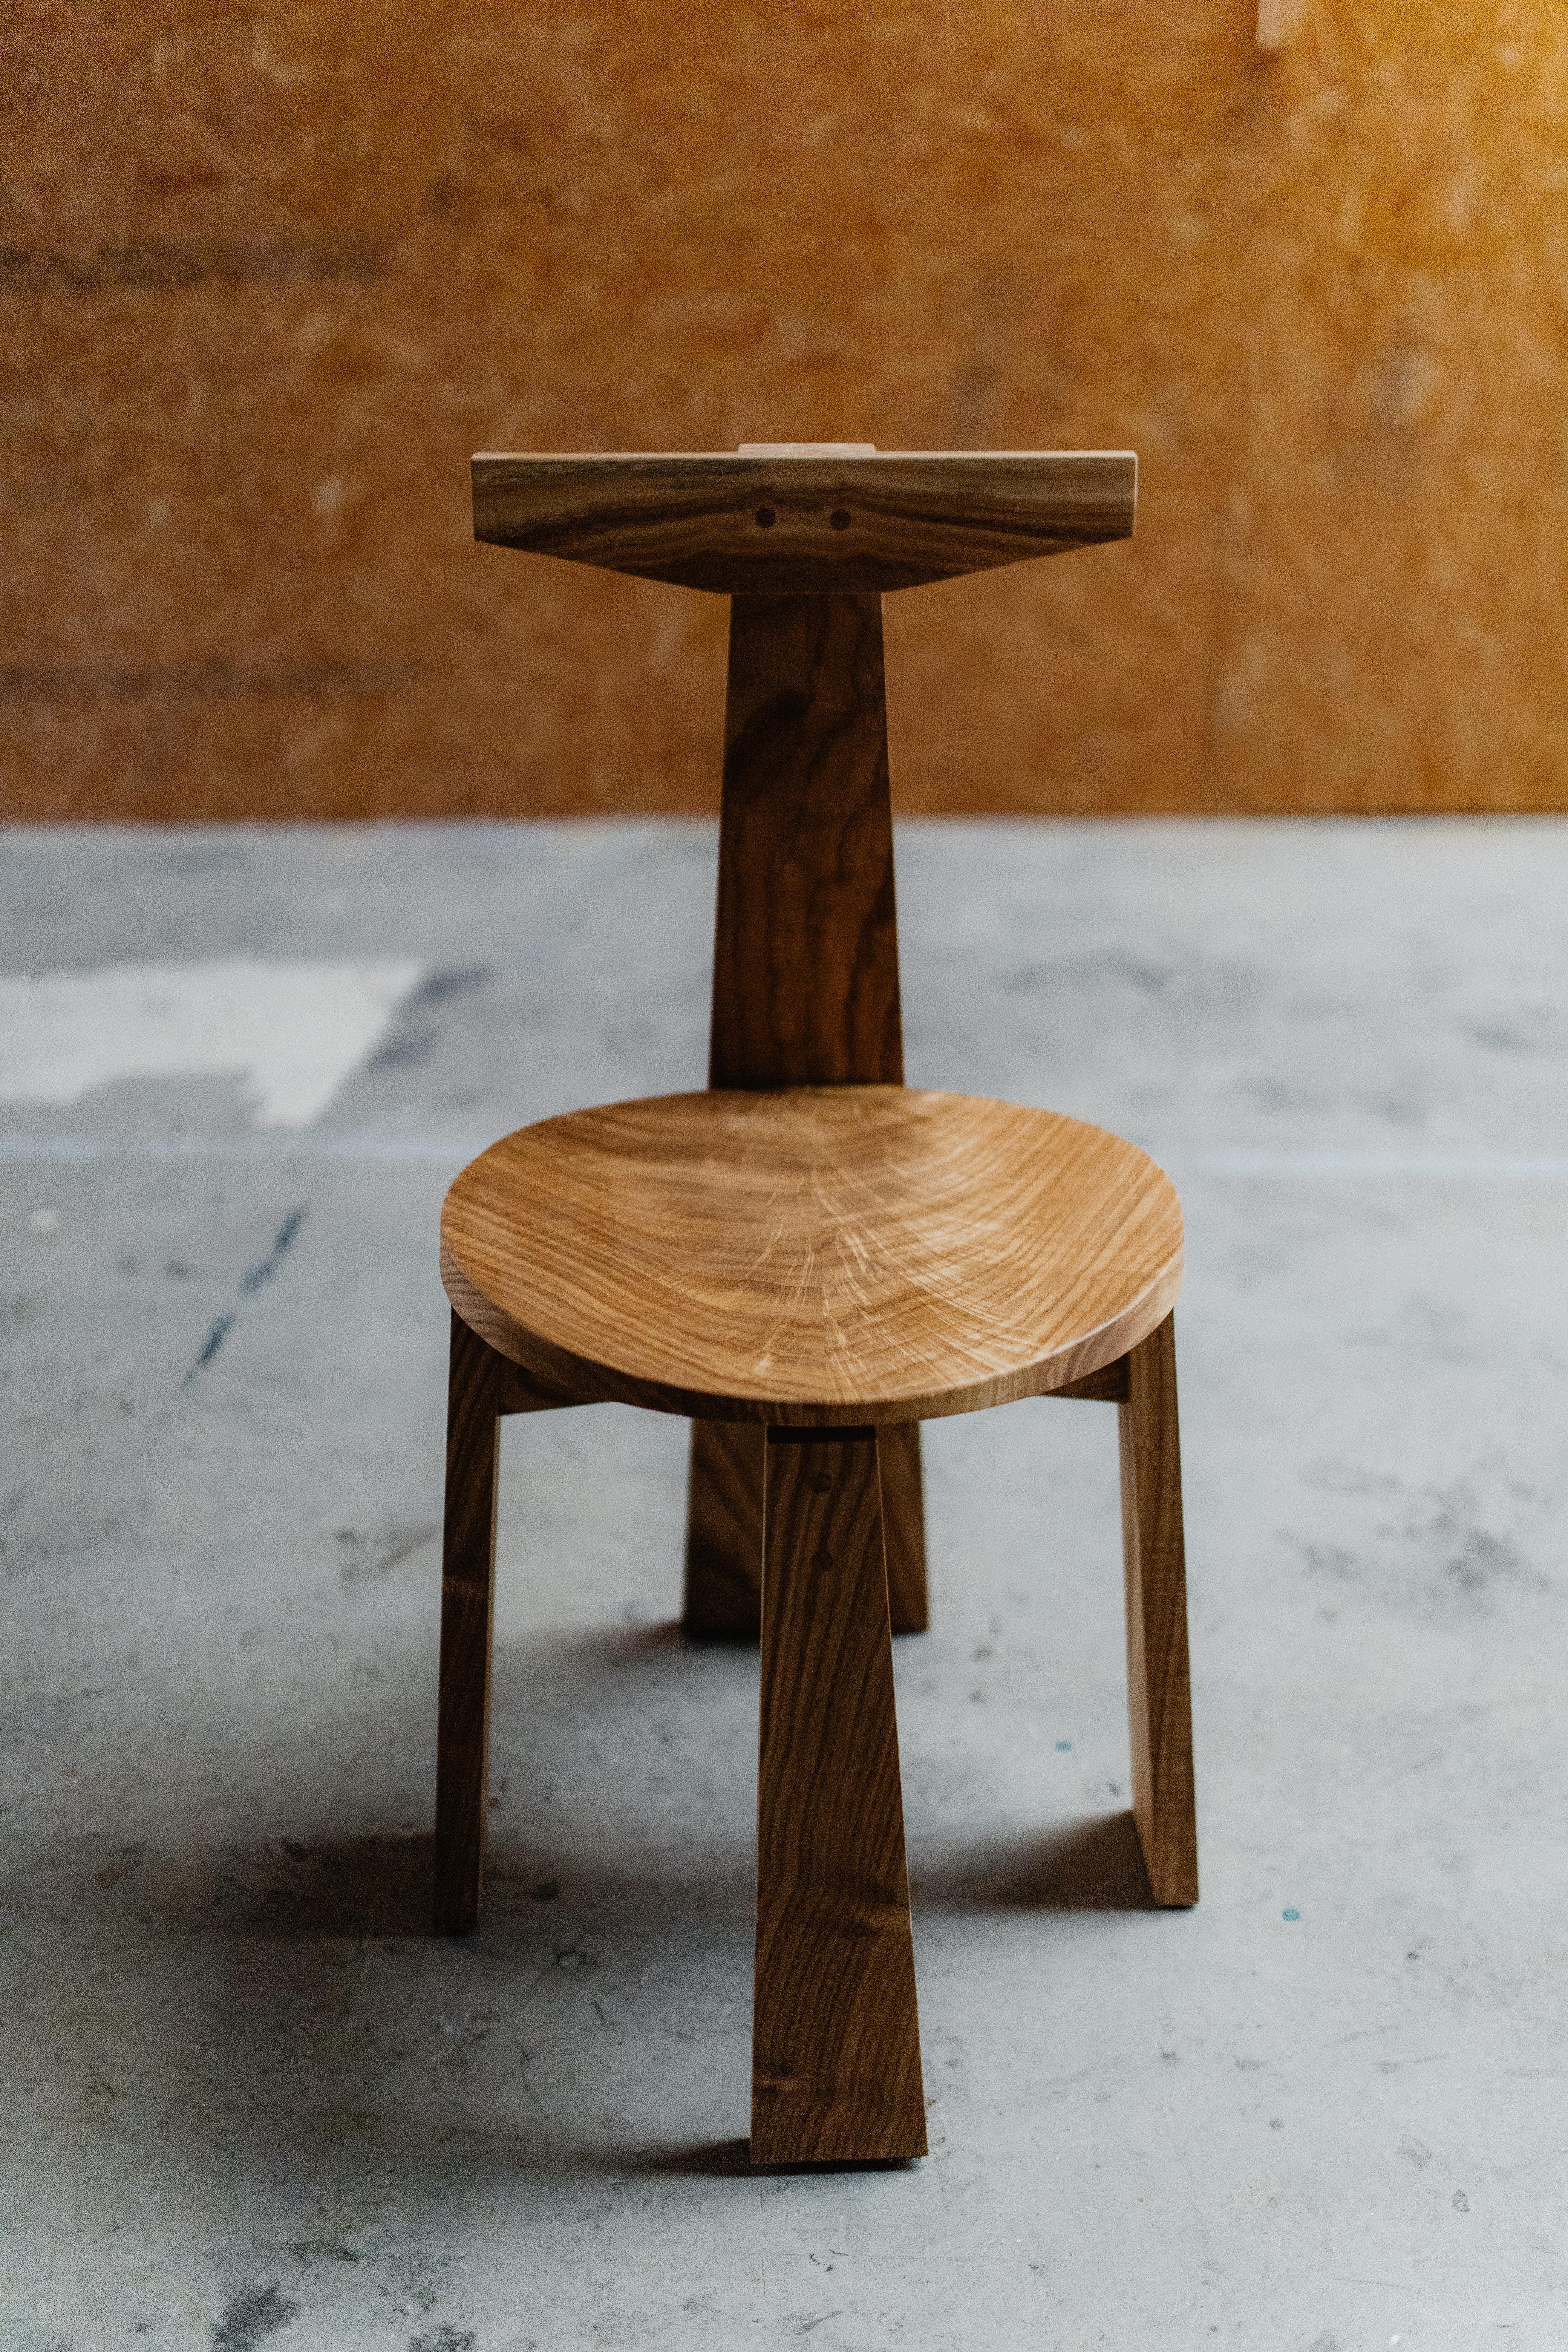 Urithi 4 leg dining chair by Albert Potgieter Designs
Dimensions: D 45 x W 45 x H 80 cm. SH: 45 cm.
Materials: Exotic wood.

The Urithi - meaning Heritage. The 4 leg version of the Urithi Dining Chair was designed to be a more artistic version.